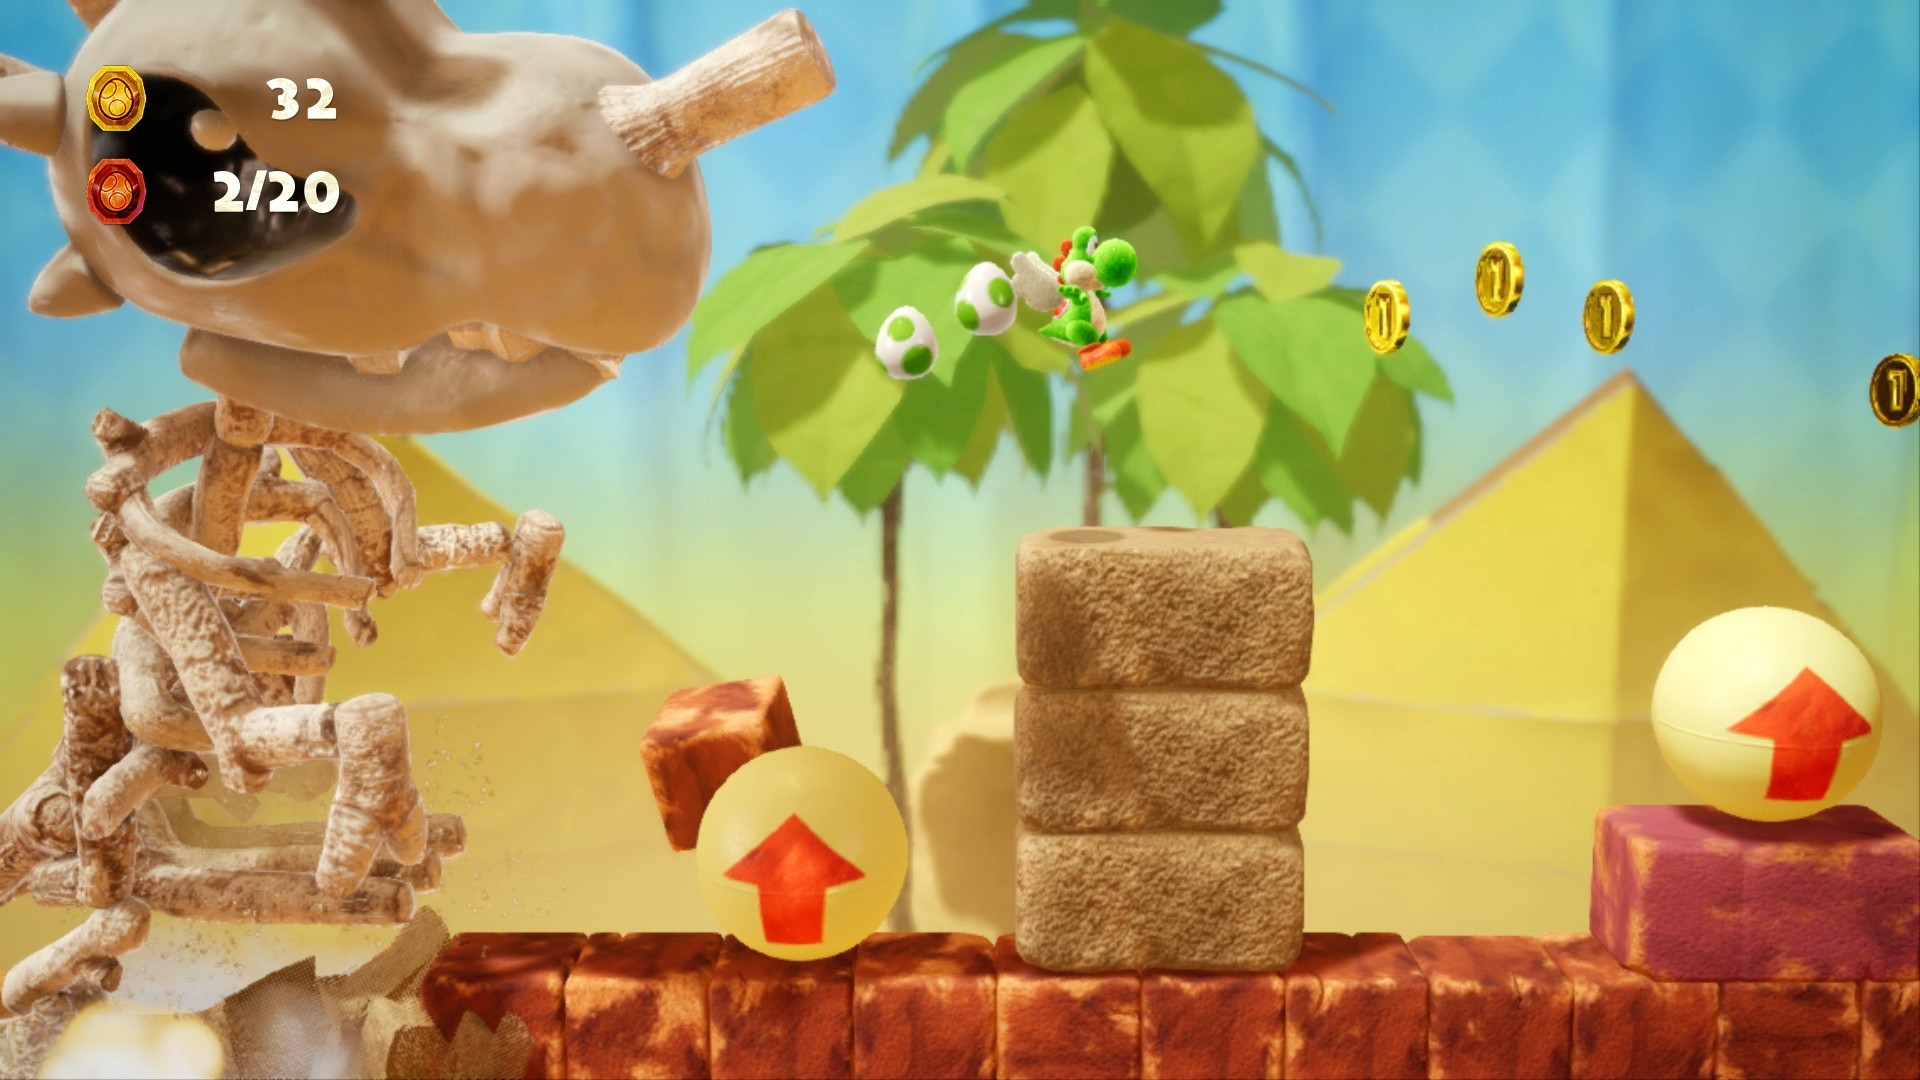 yoshi's crafted world co op